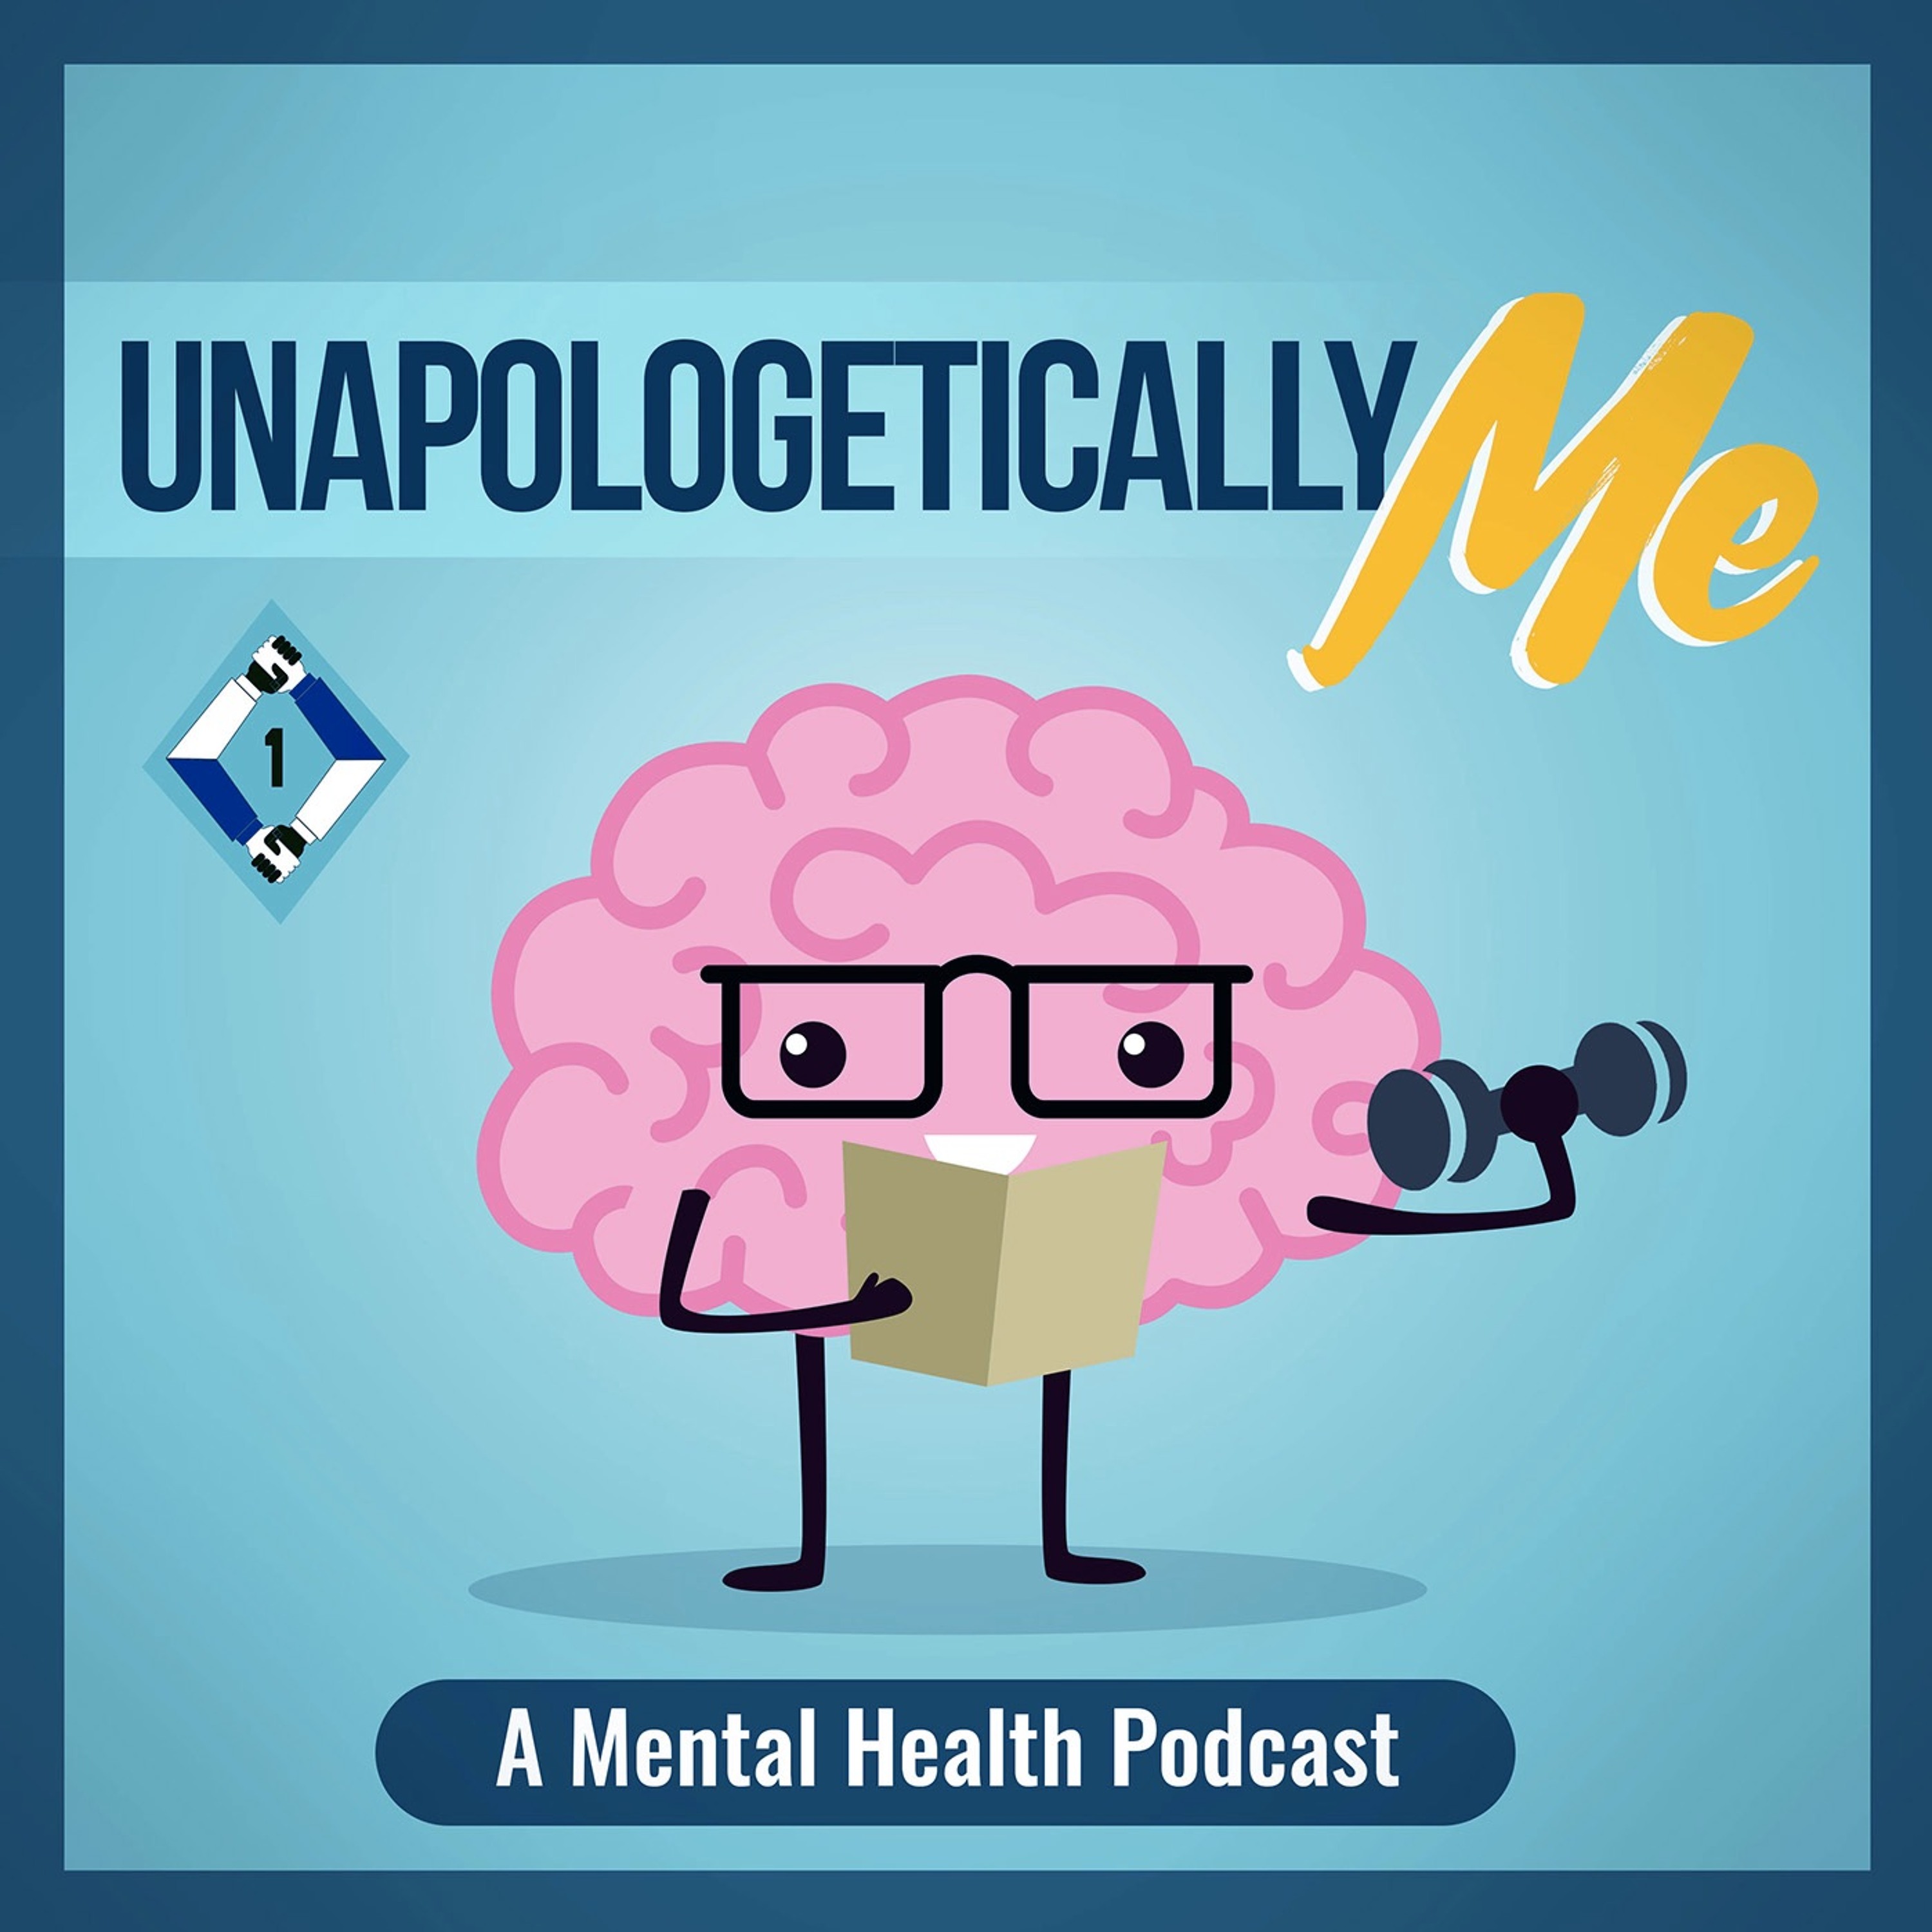 Unapologetically Me: A Mental Health Podcast - The Best Way To Meditate